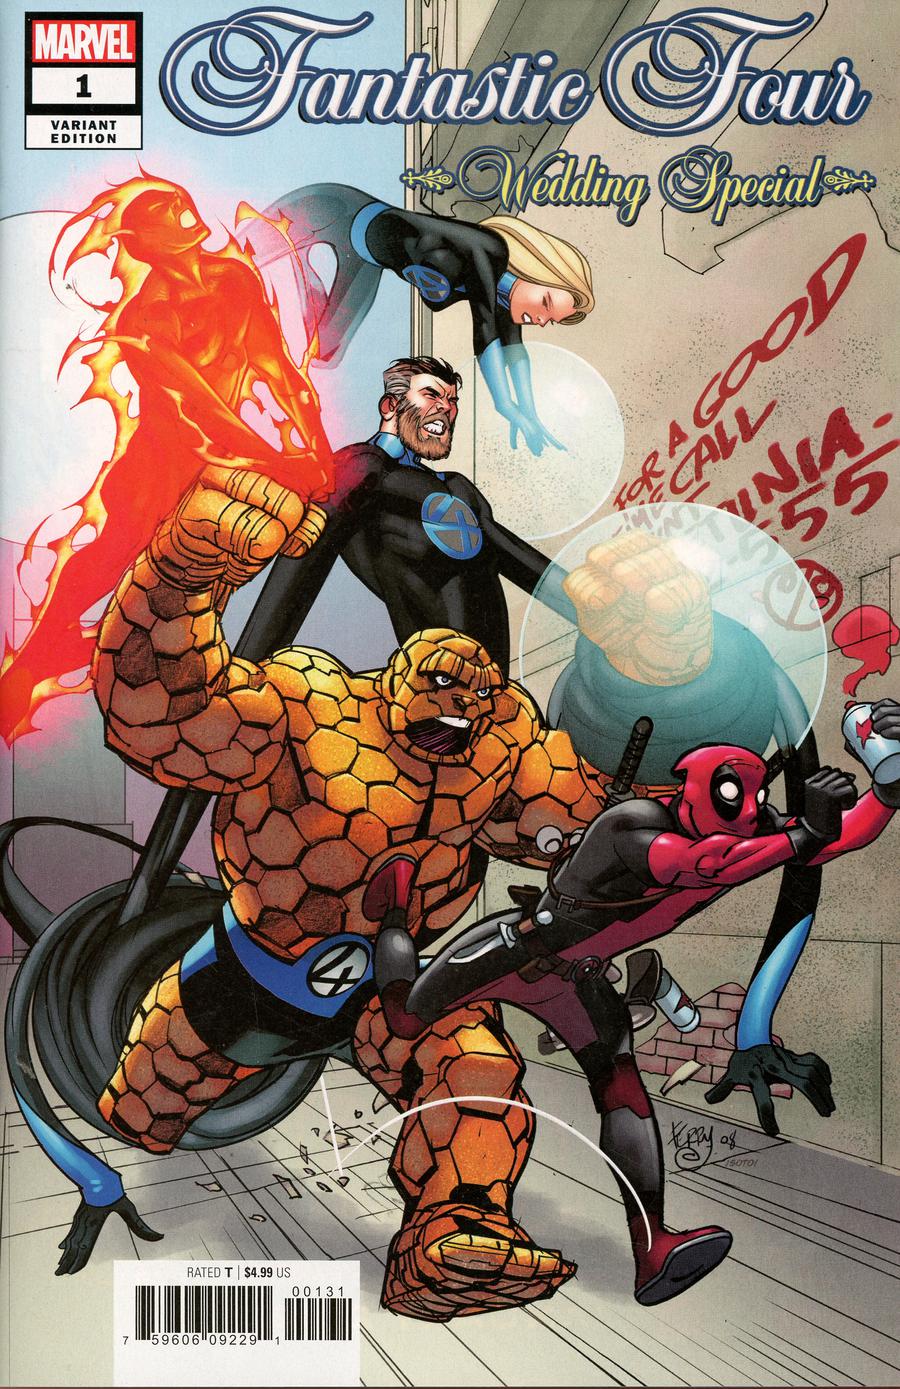 Fantastic Four Wedding Special #1 Cover B Variant Pasqual Ferry Cover